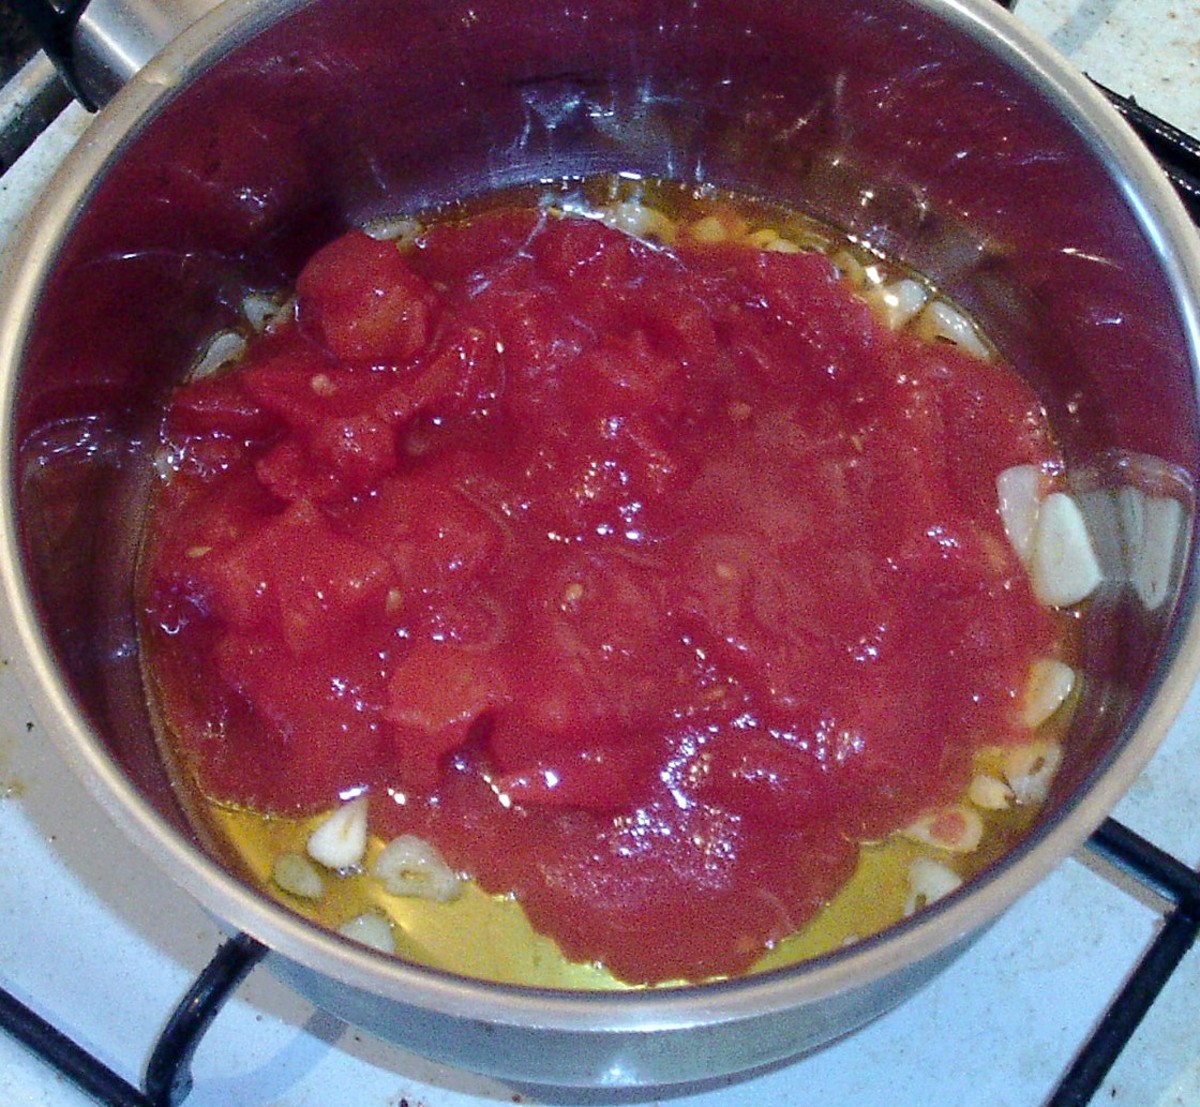 Canned tomatoes are added to softened garlic